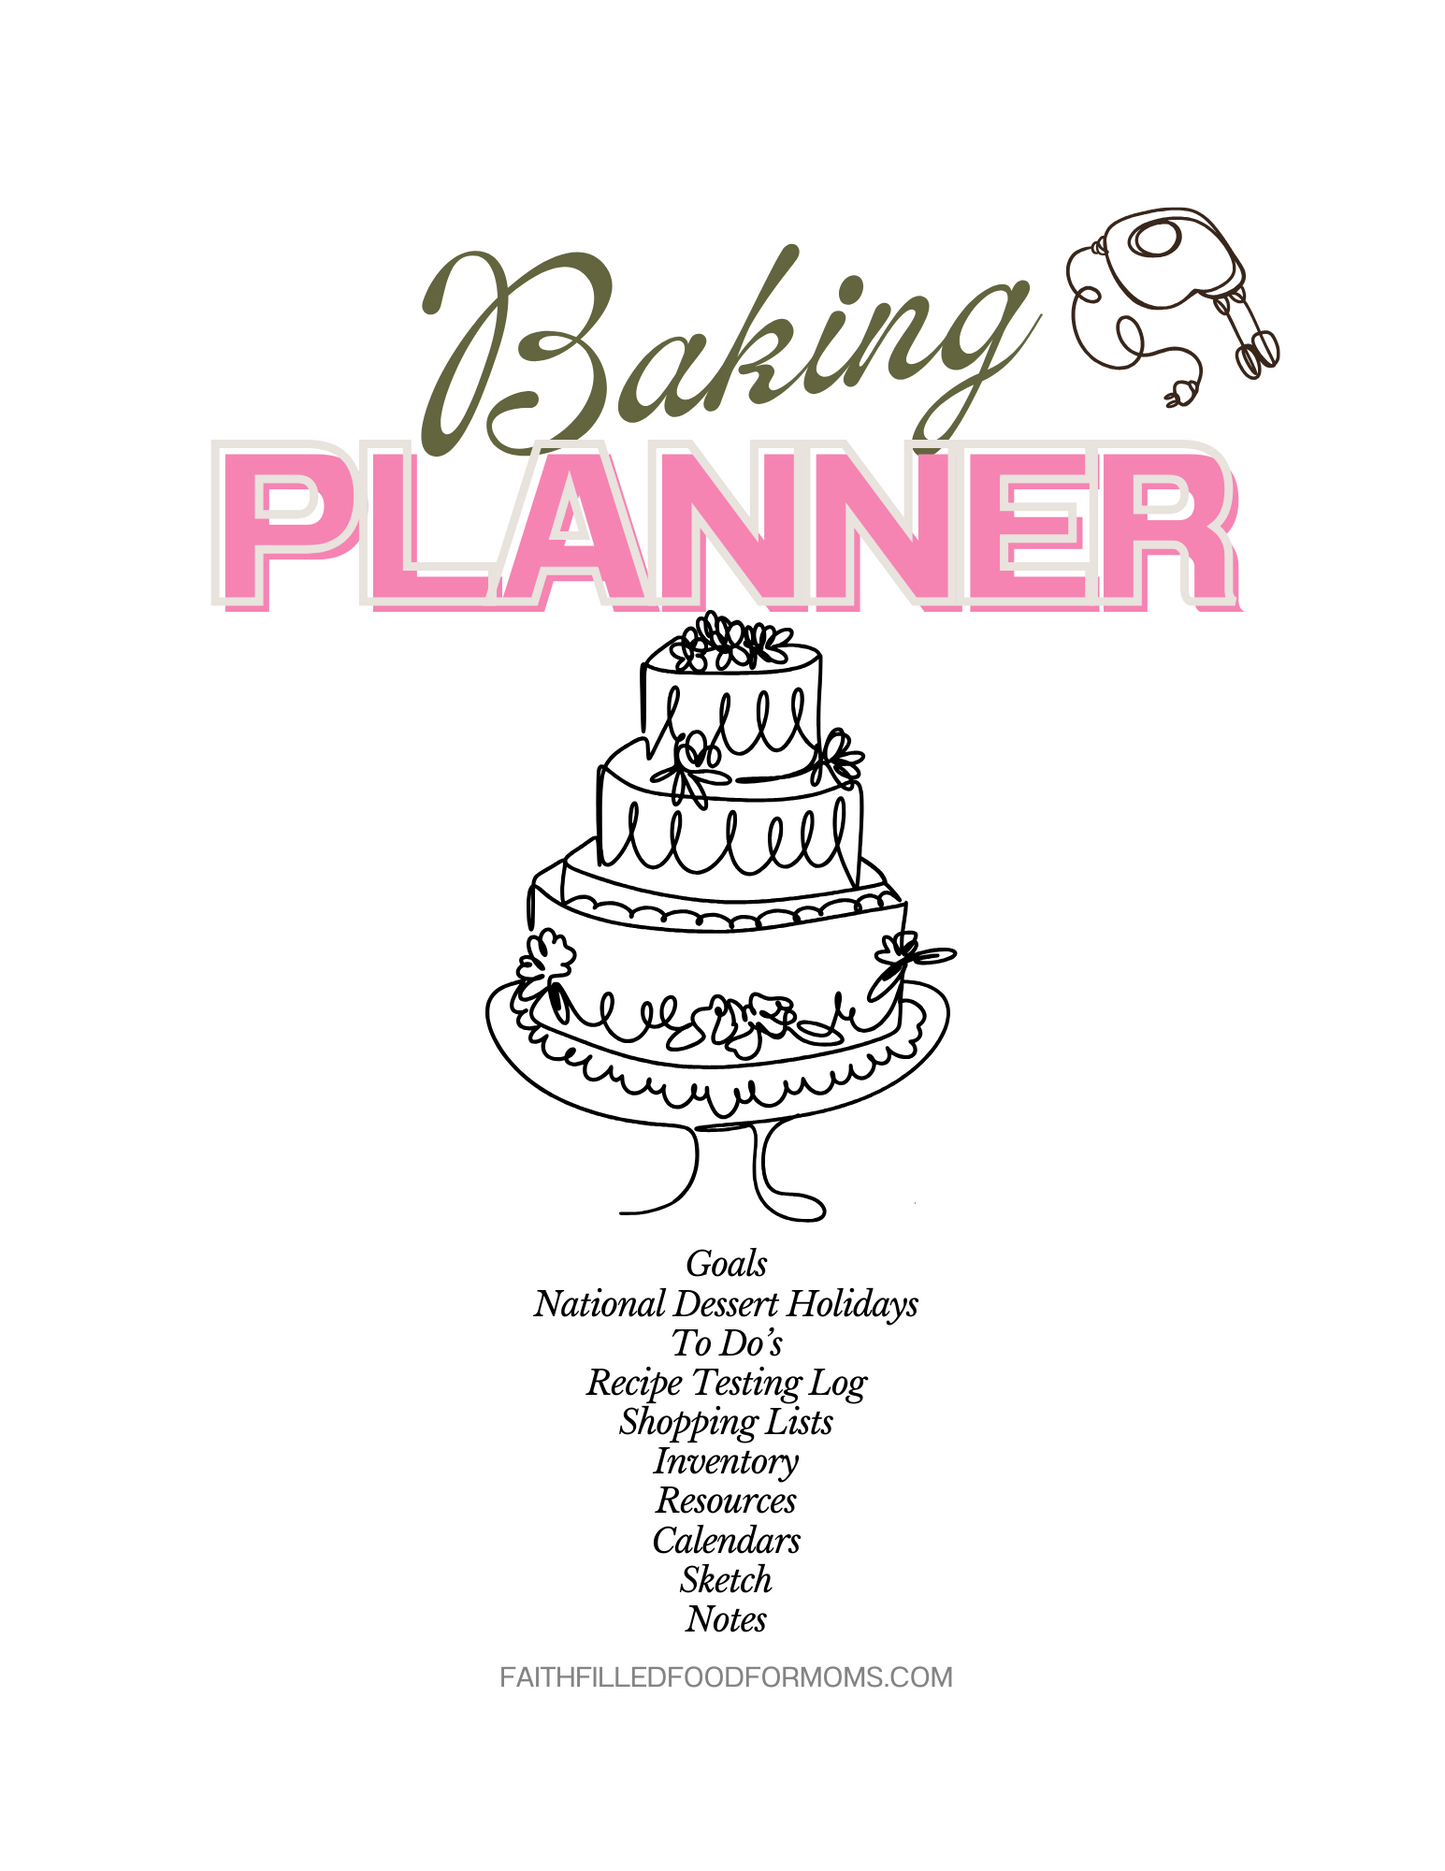 Everything Baking Planner for Home Bakers